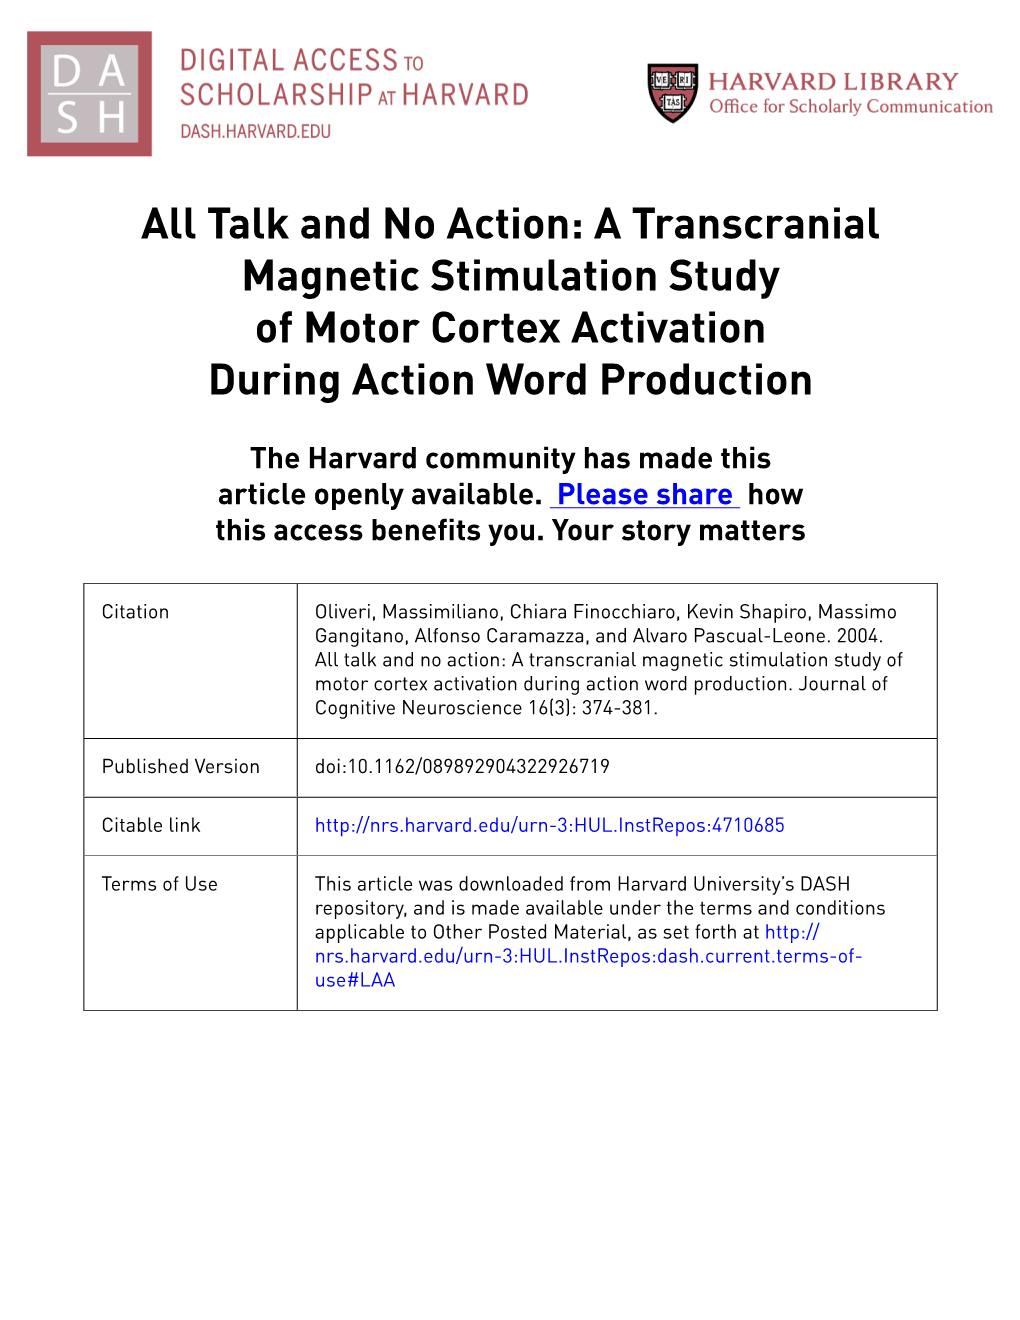 All Talk and No Action: a Transcranial Magnetic Stimulation Study of Motor Cortex Activation During Action Word Production